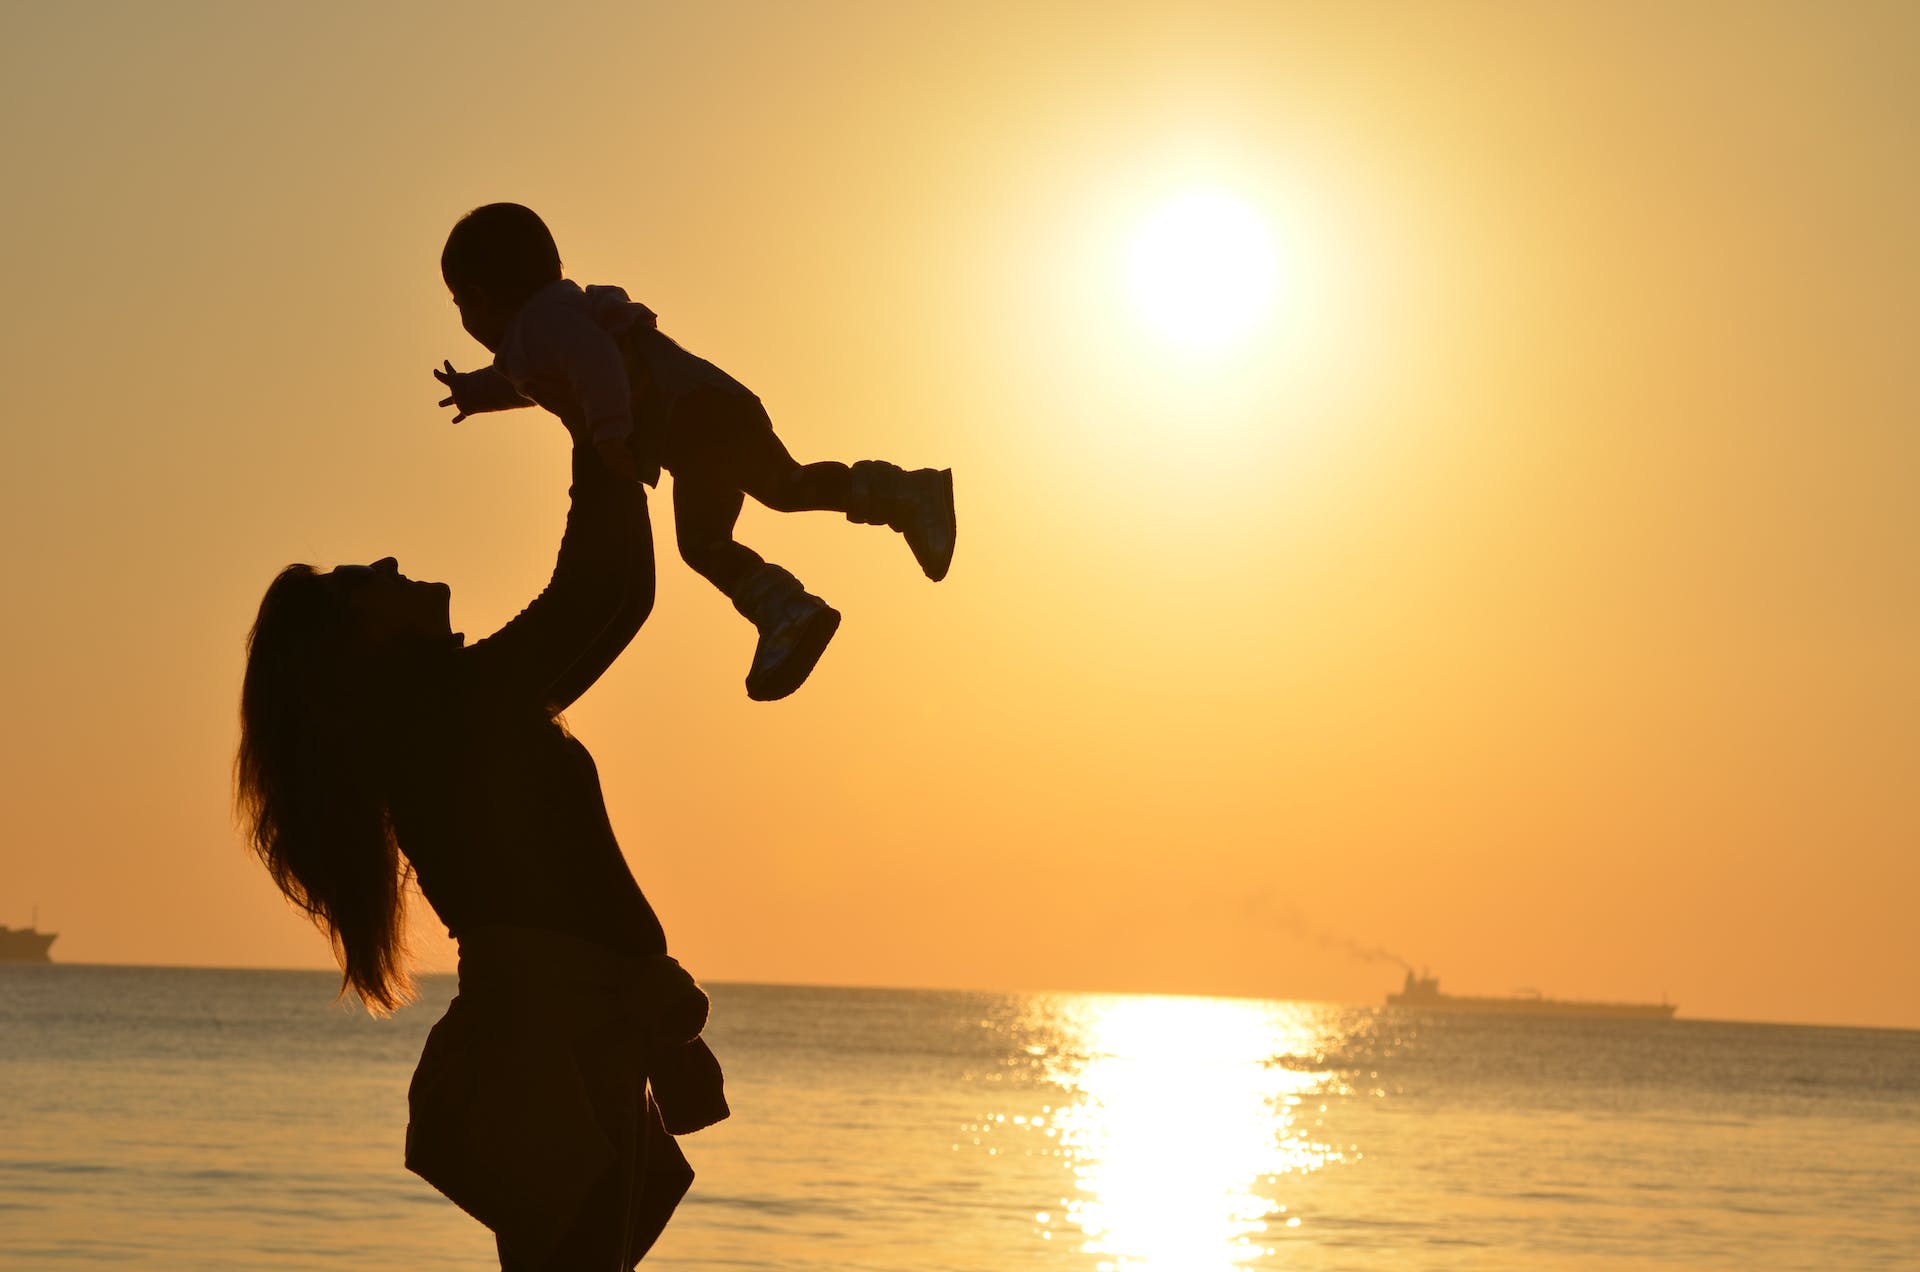 Silhouette of a mother carrying her baby at the beach during golden hour | Source: Pexels